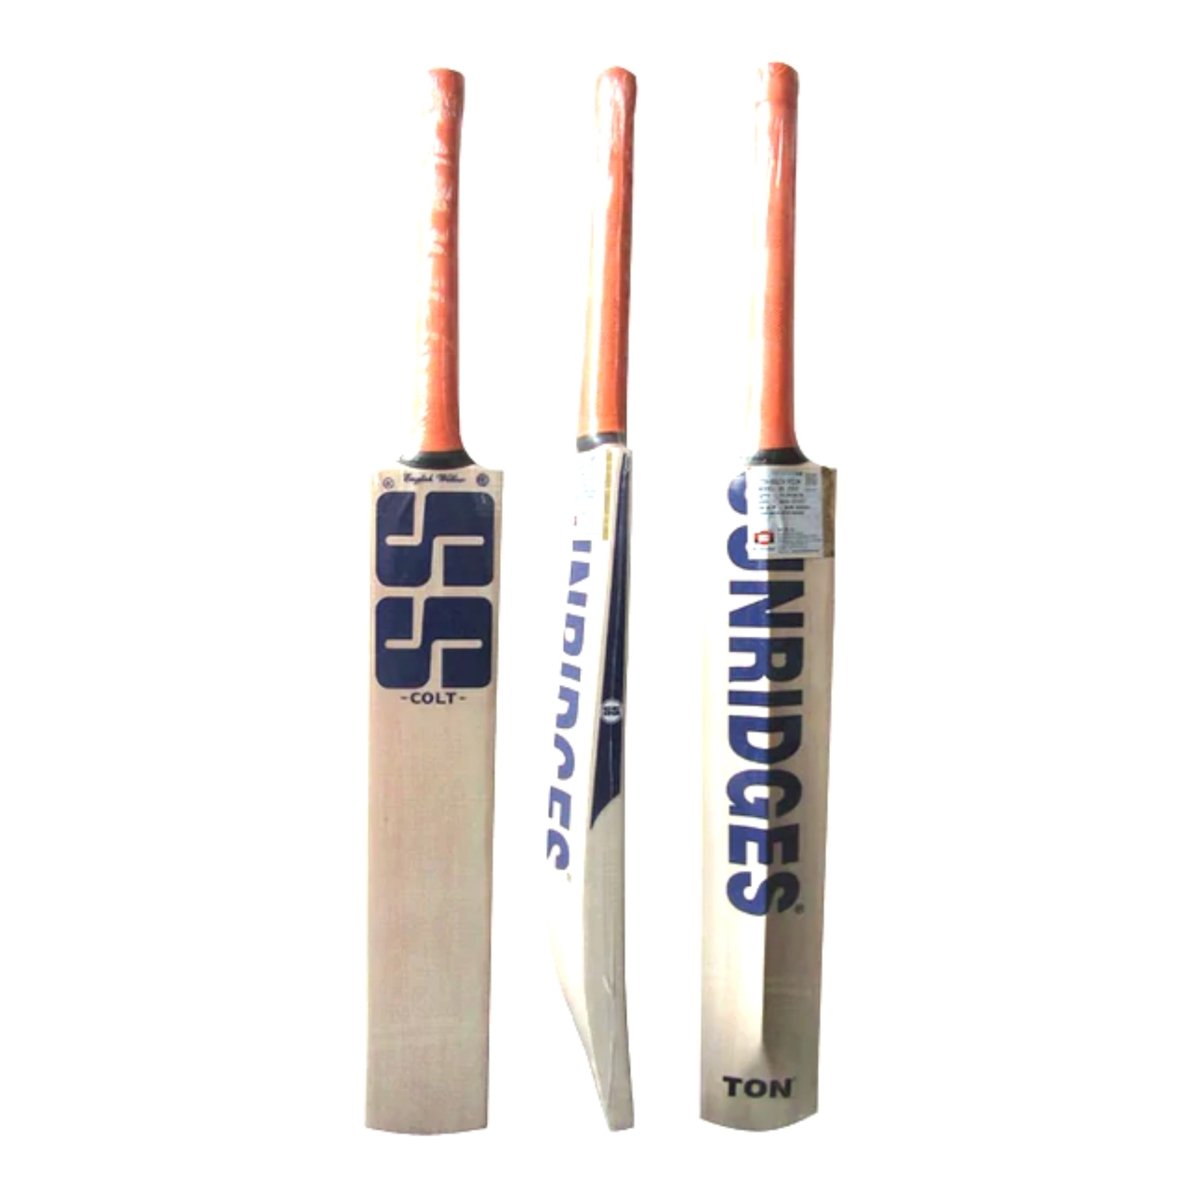 SS Colt Youth English Willow Cricket Bat